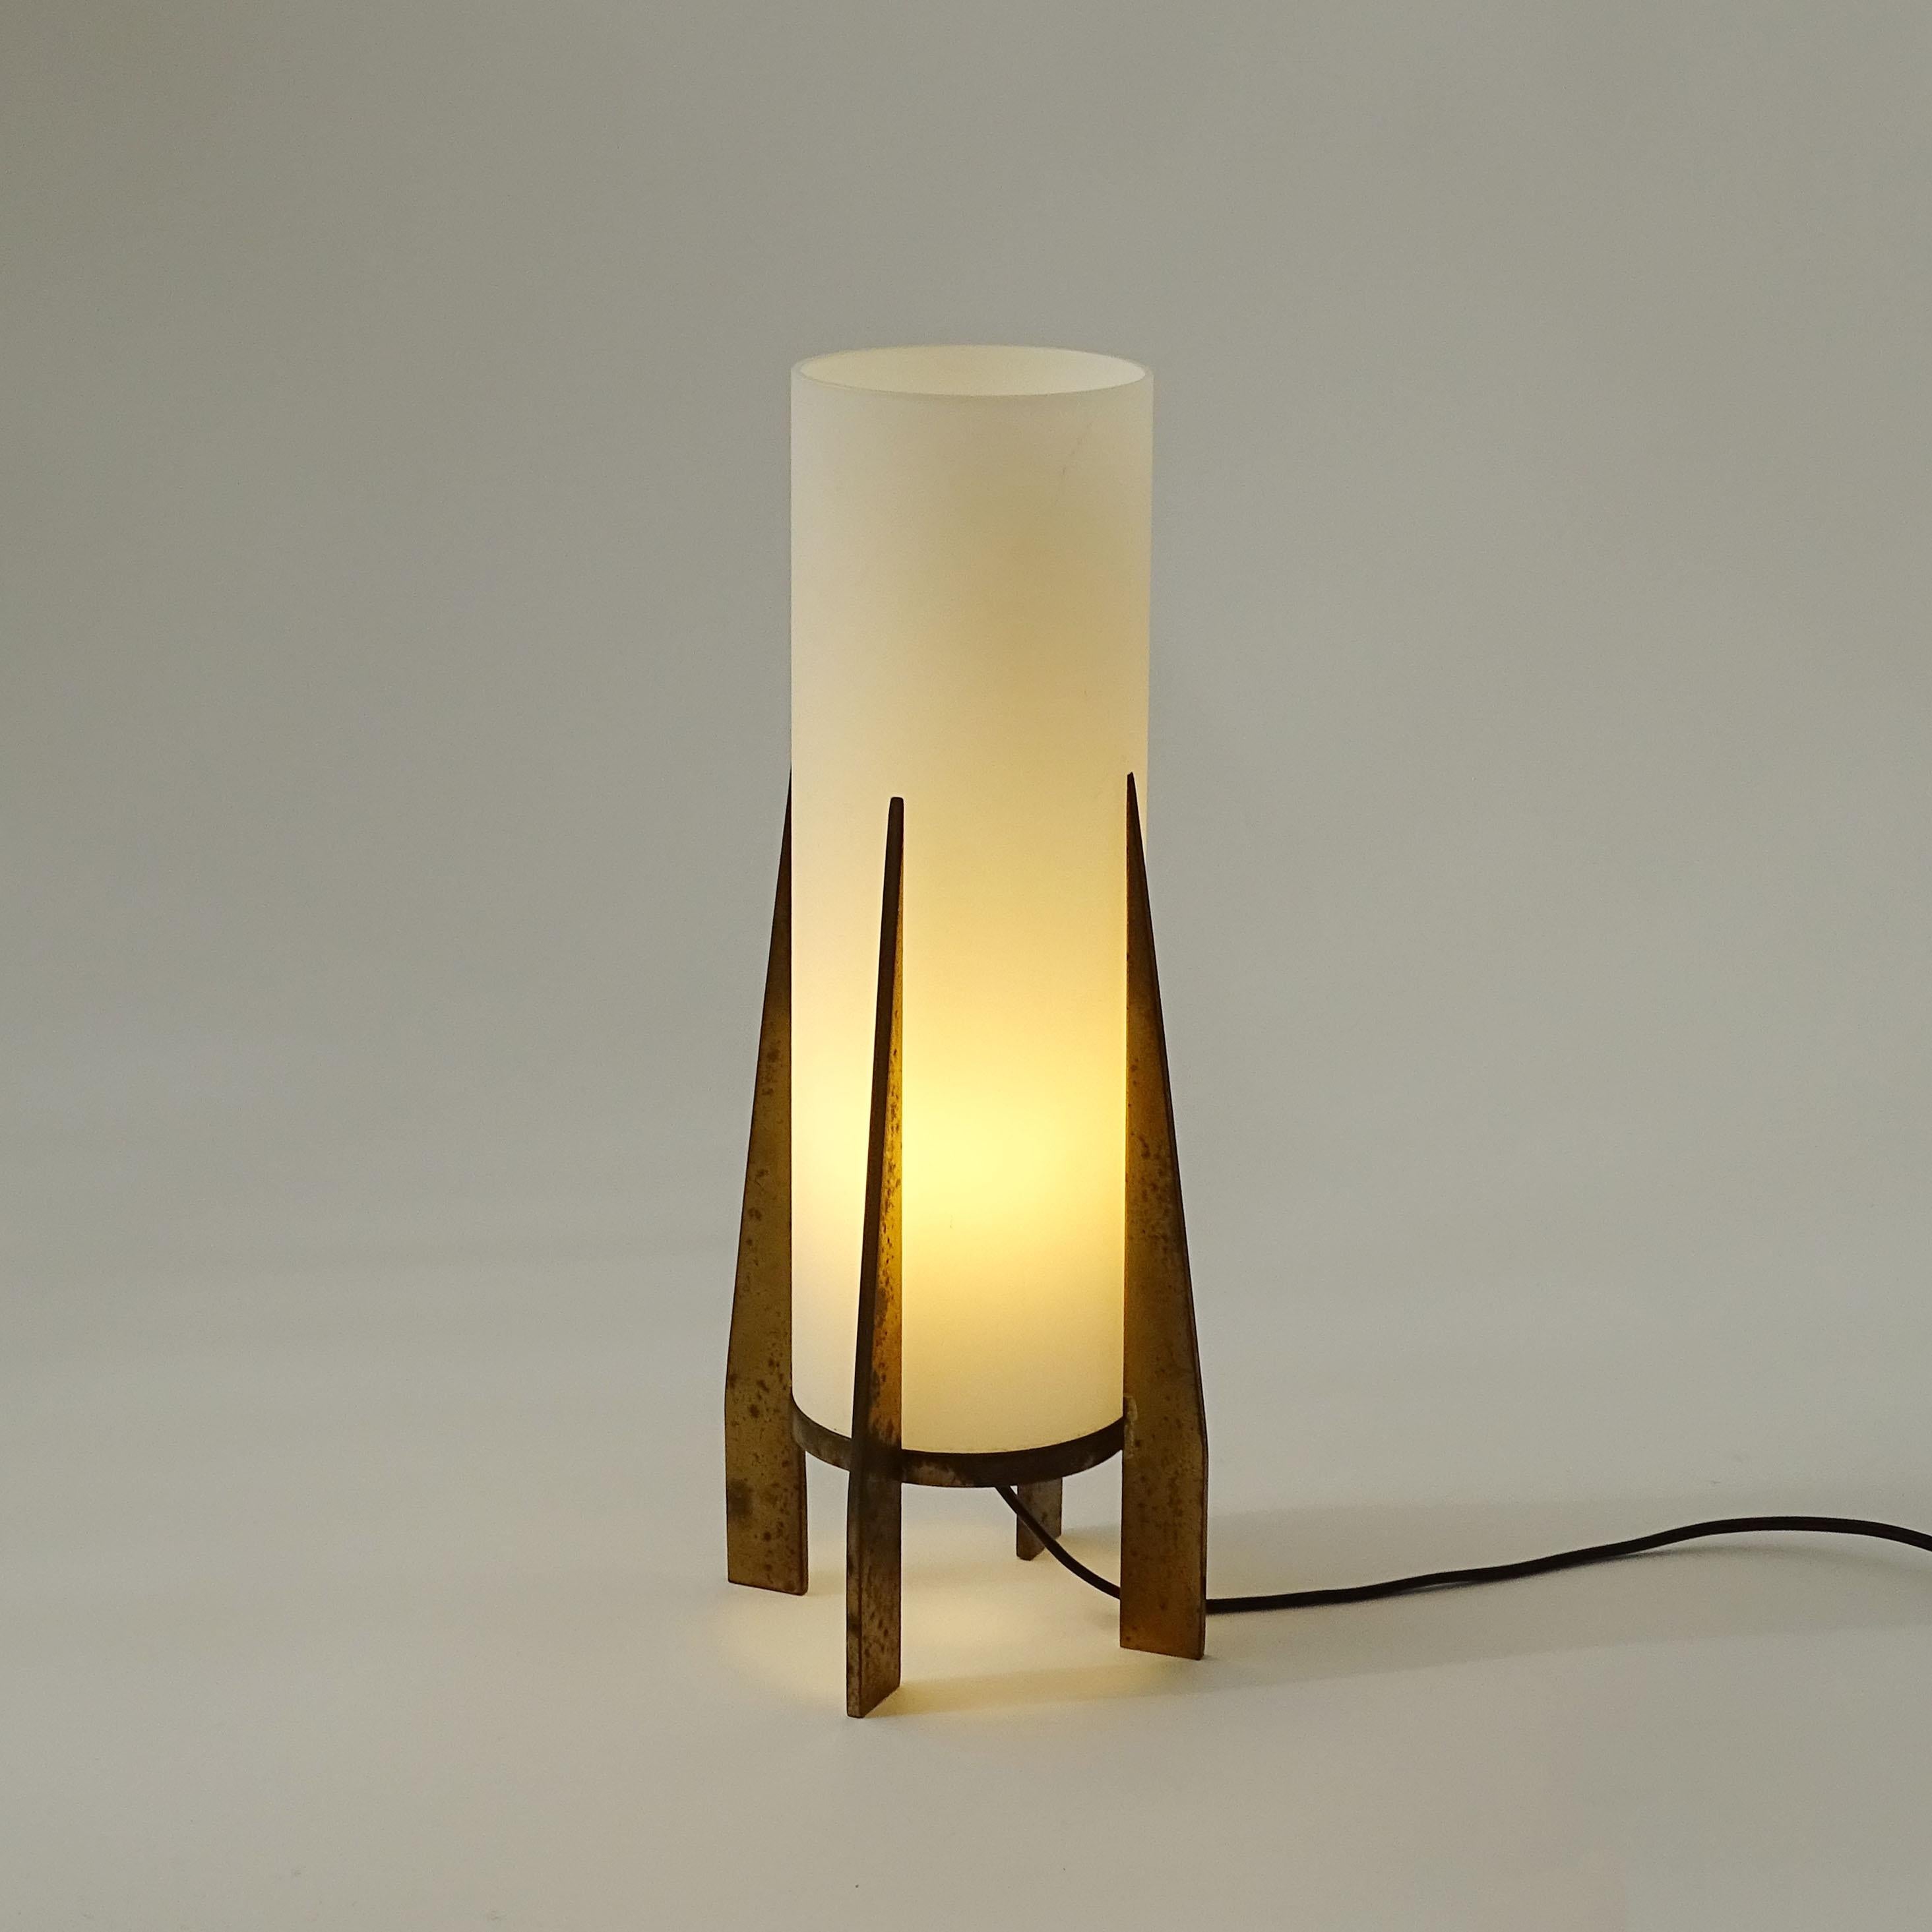 Mid-20th Century Stilnovo Brass and Glass Table Lamp, Italy 1950s For Sale